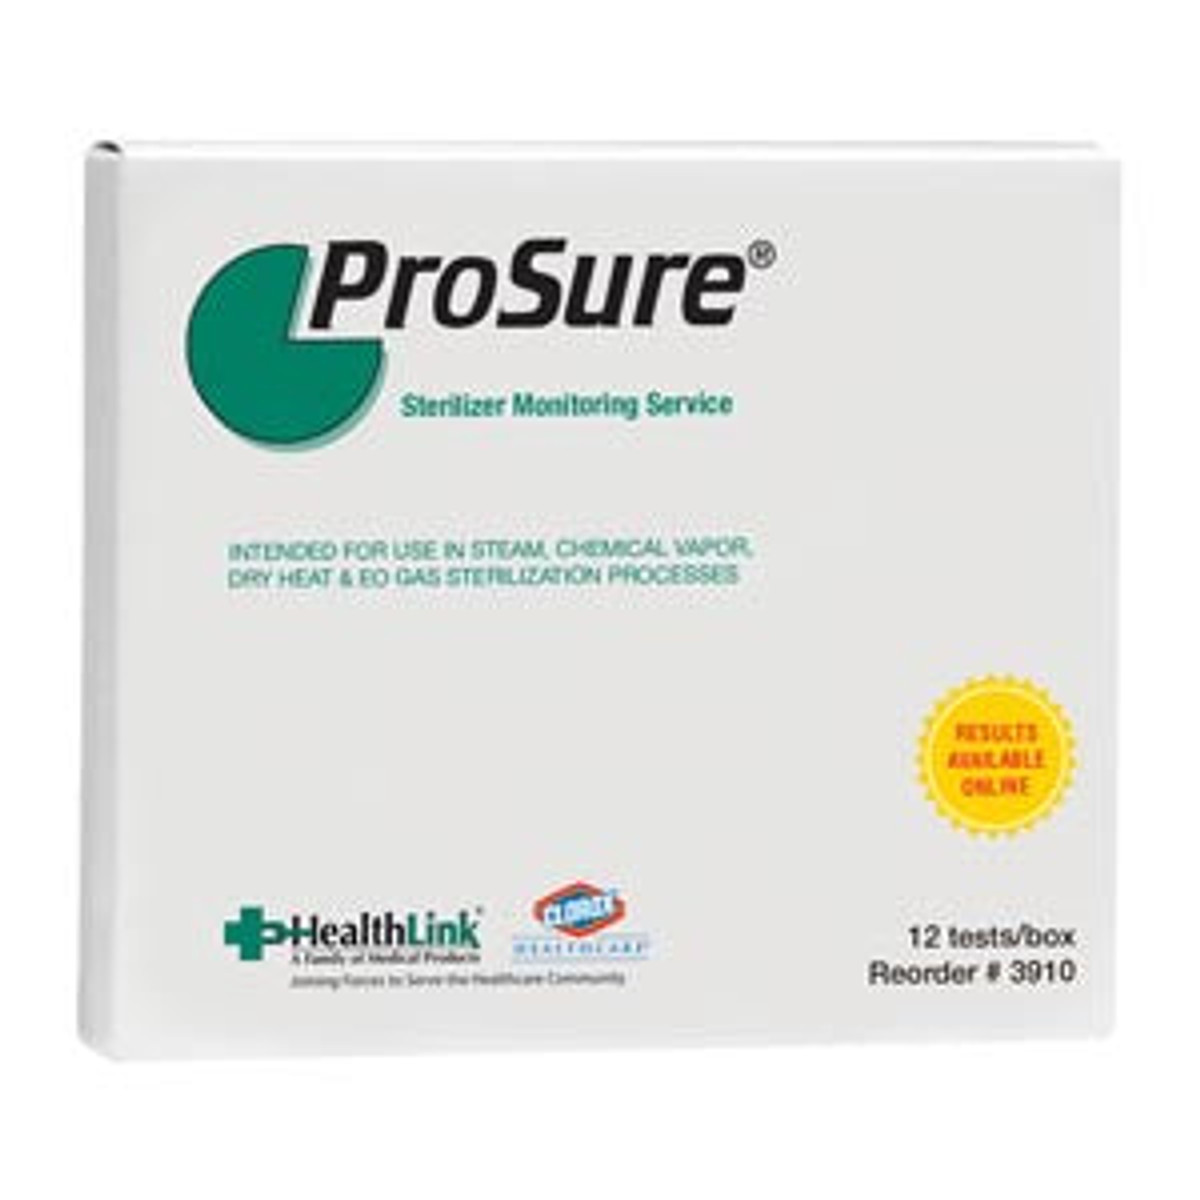 EDM3 ProSure Mailers Monitoring System